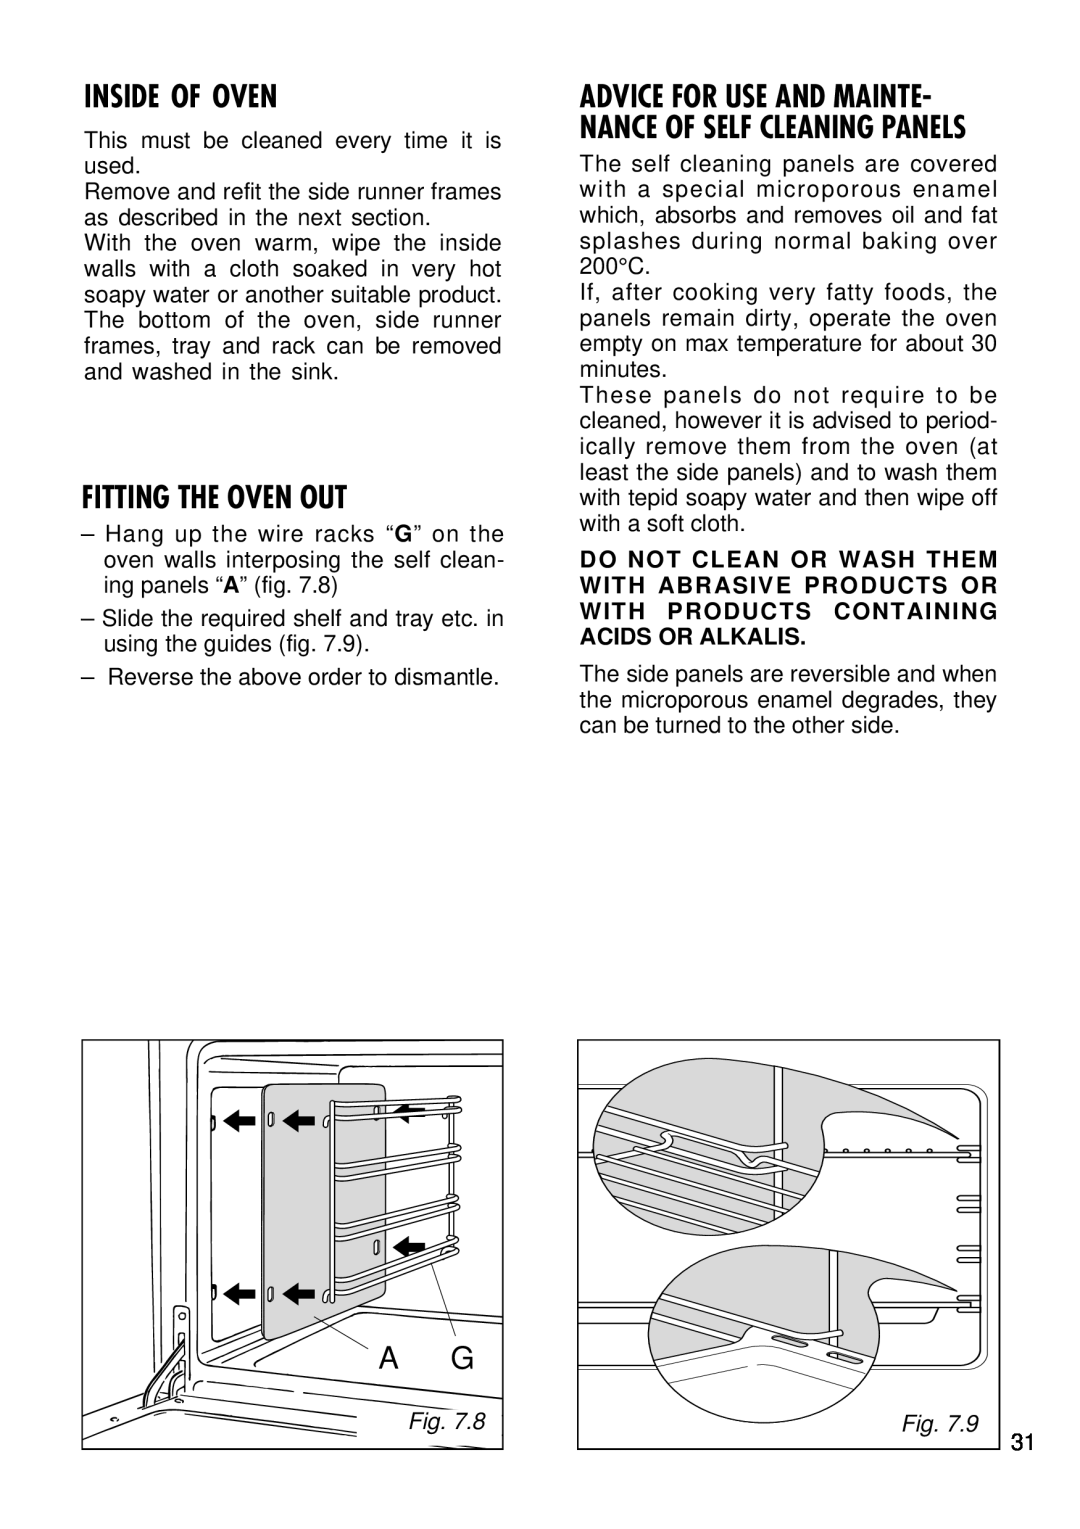 Kenwood CK 740 manual Inside Of Oven, Fitting The Oven Out, Advice For Use And Mainte- Nance Of Self Cleaning Panels 